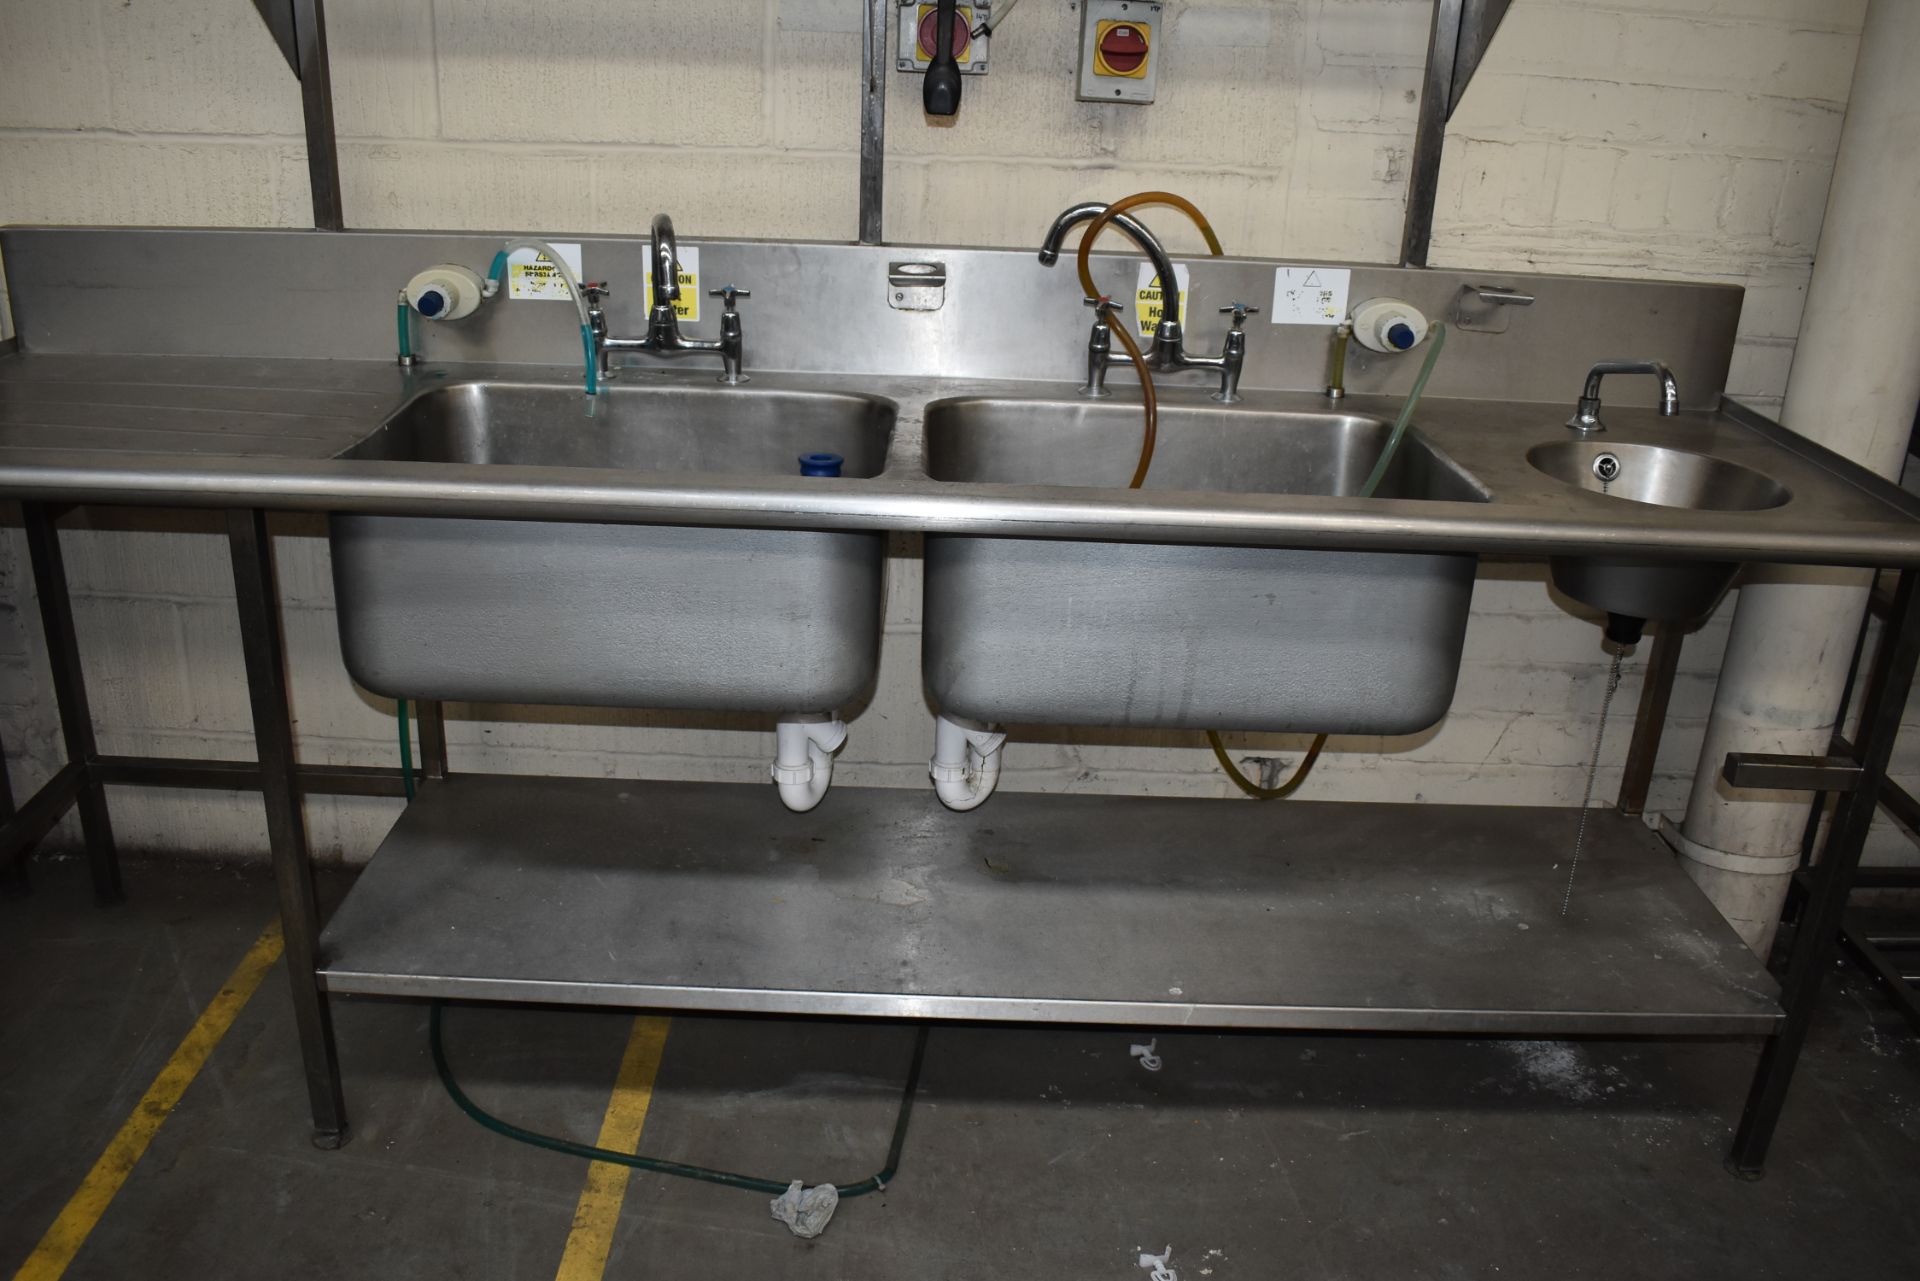 1 x Stainless Steel Commercial Wash Basin Unit With Twin Sink Bowl, Mixer Taps, Undershelf, - Image 4 of 8